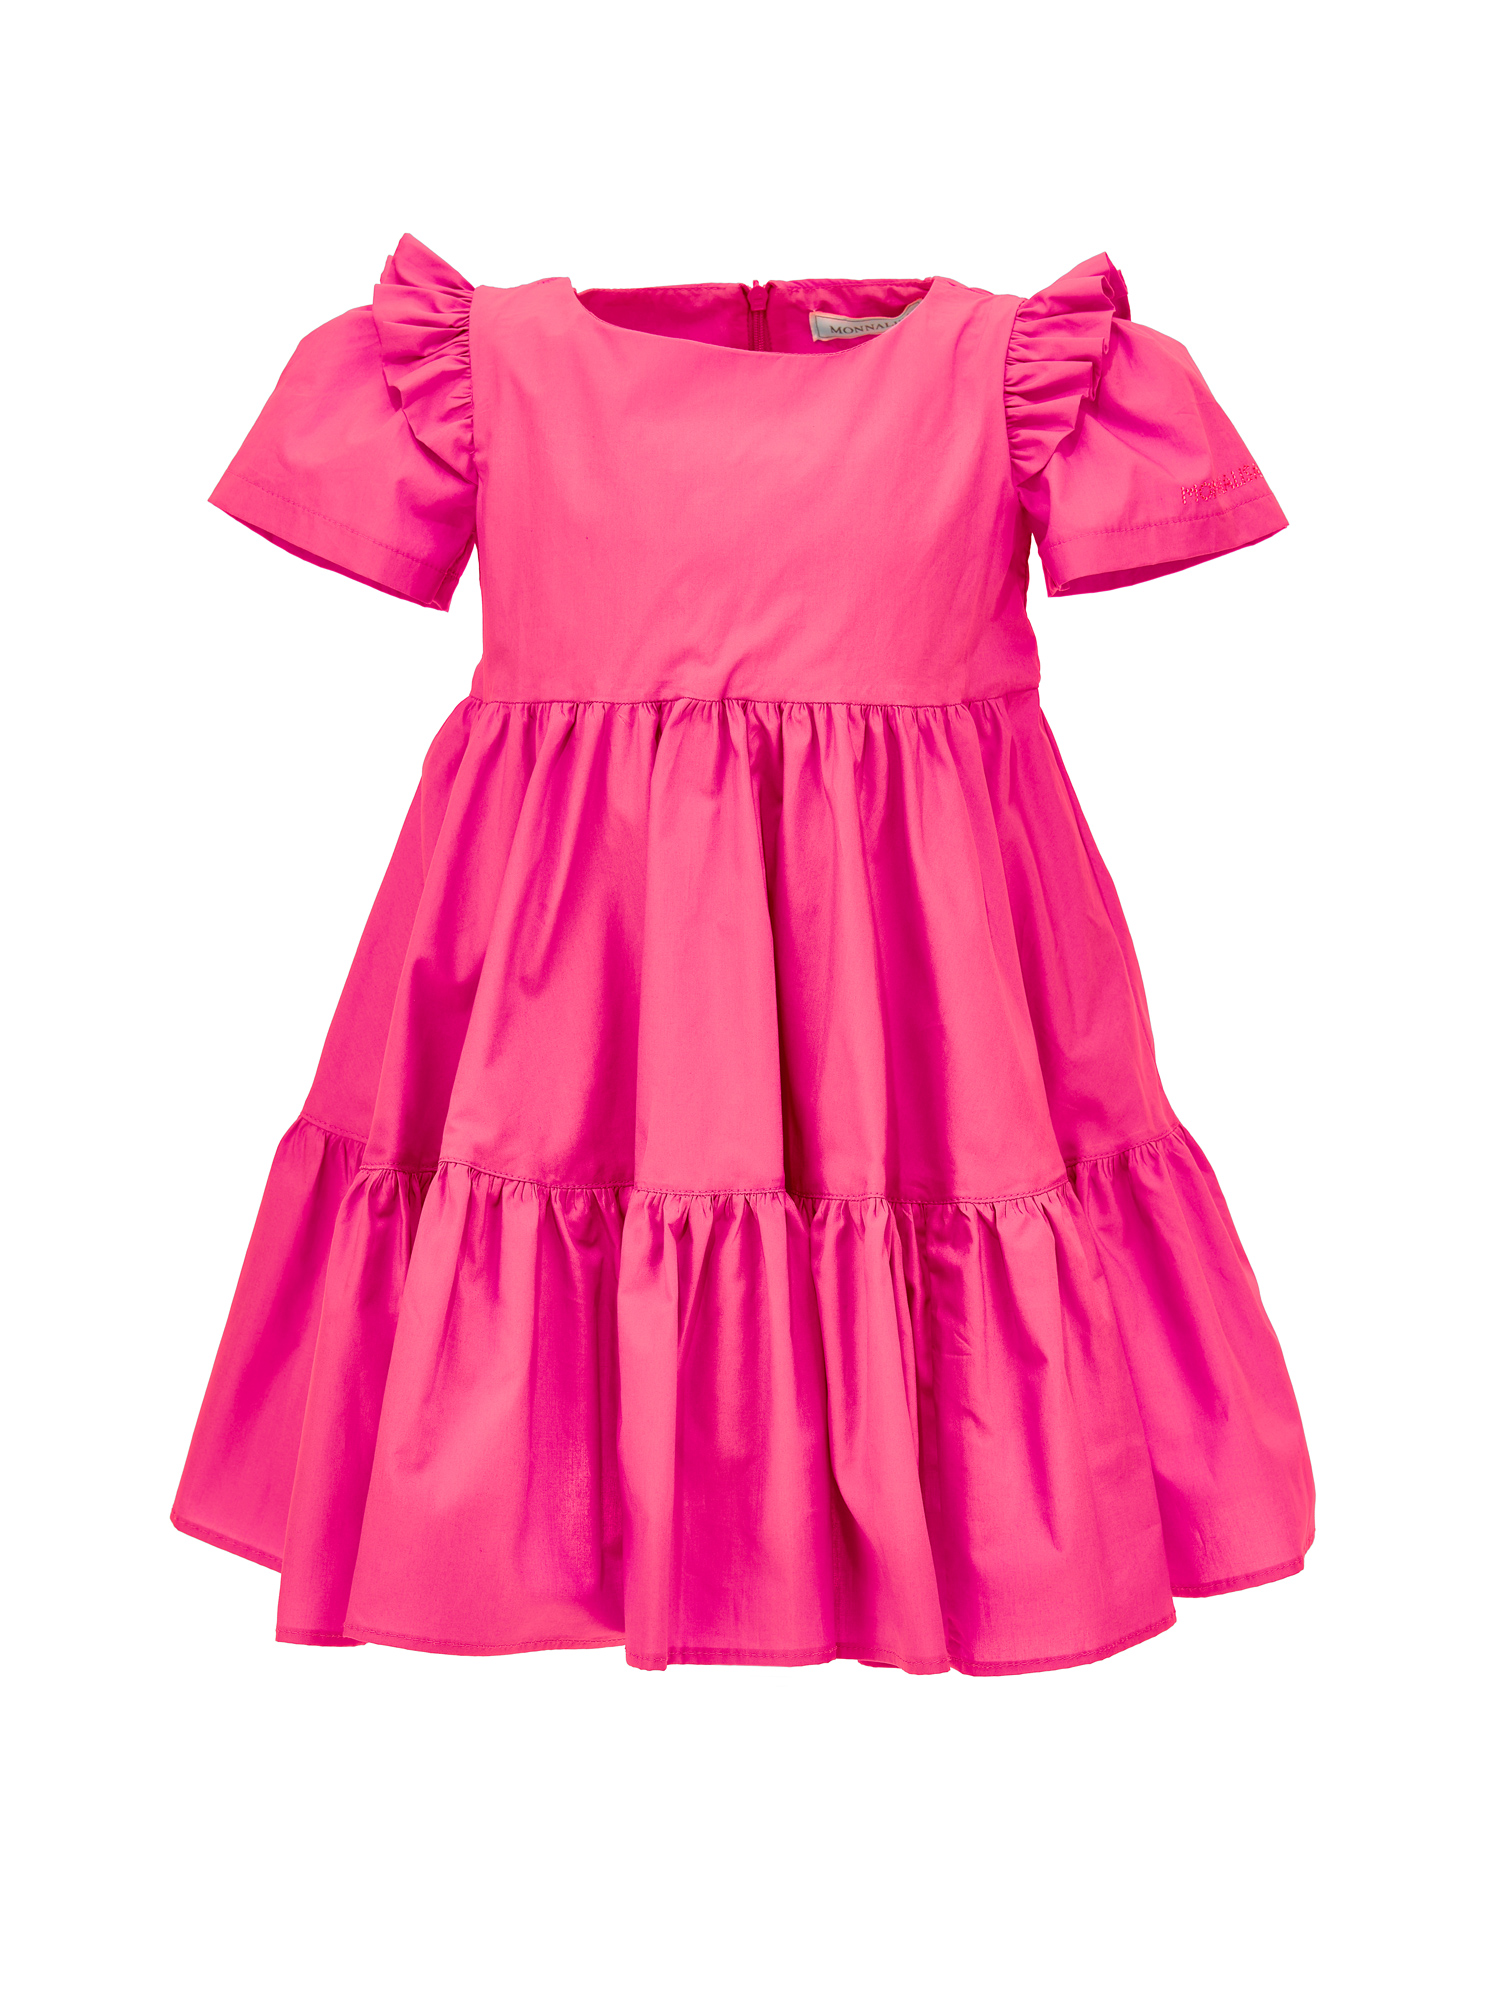 Monnalisa Kids'   Cotton Dress With Flounces In Bright Peach Pink